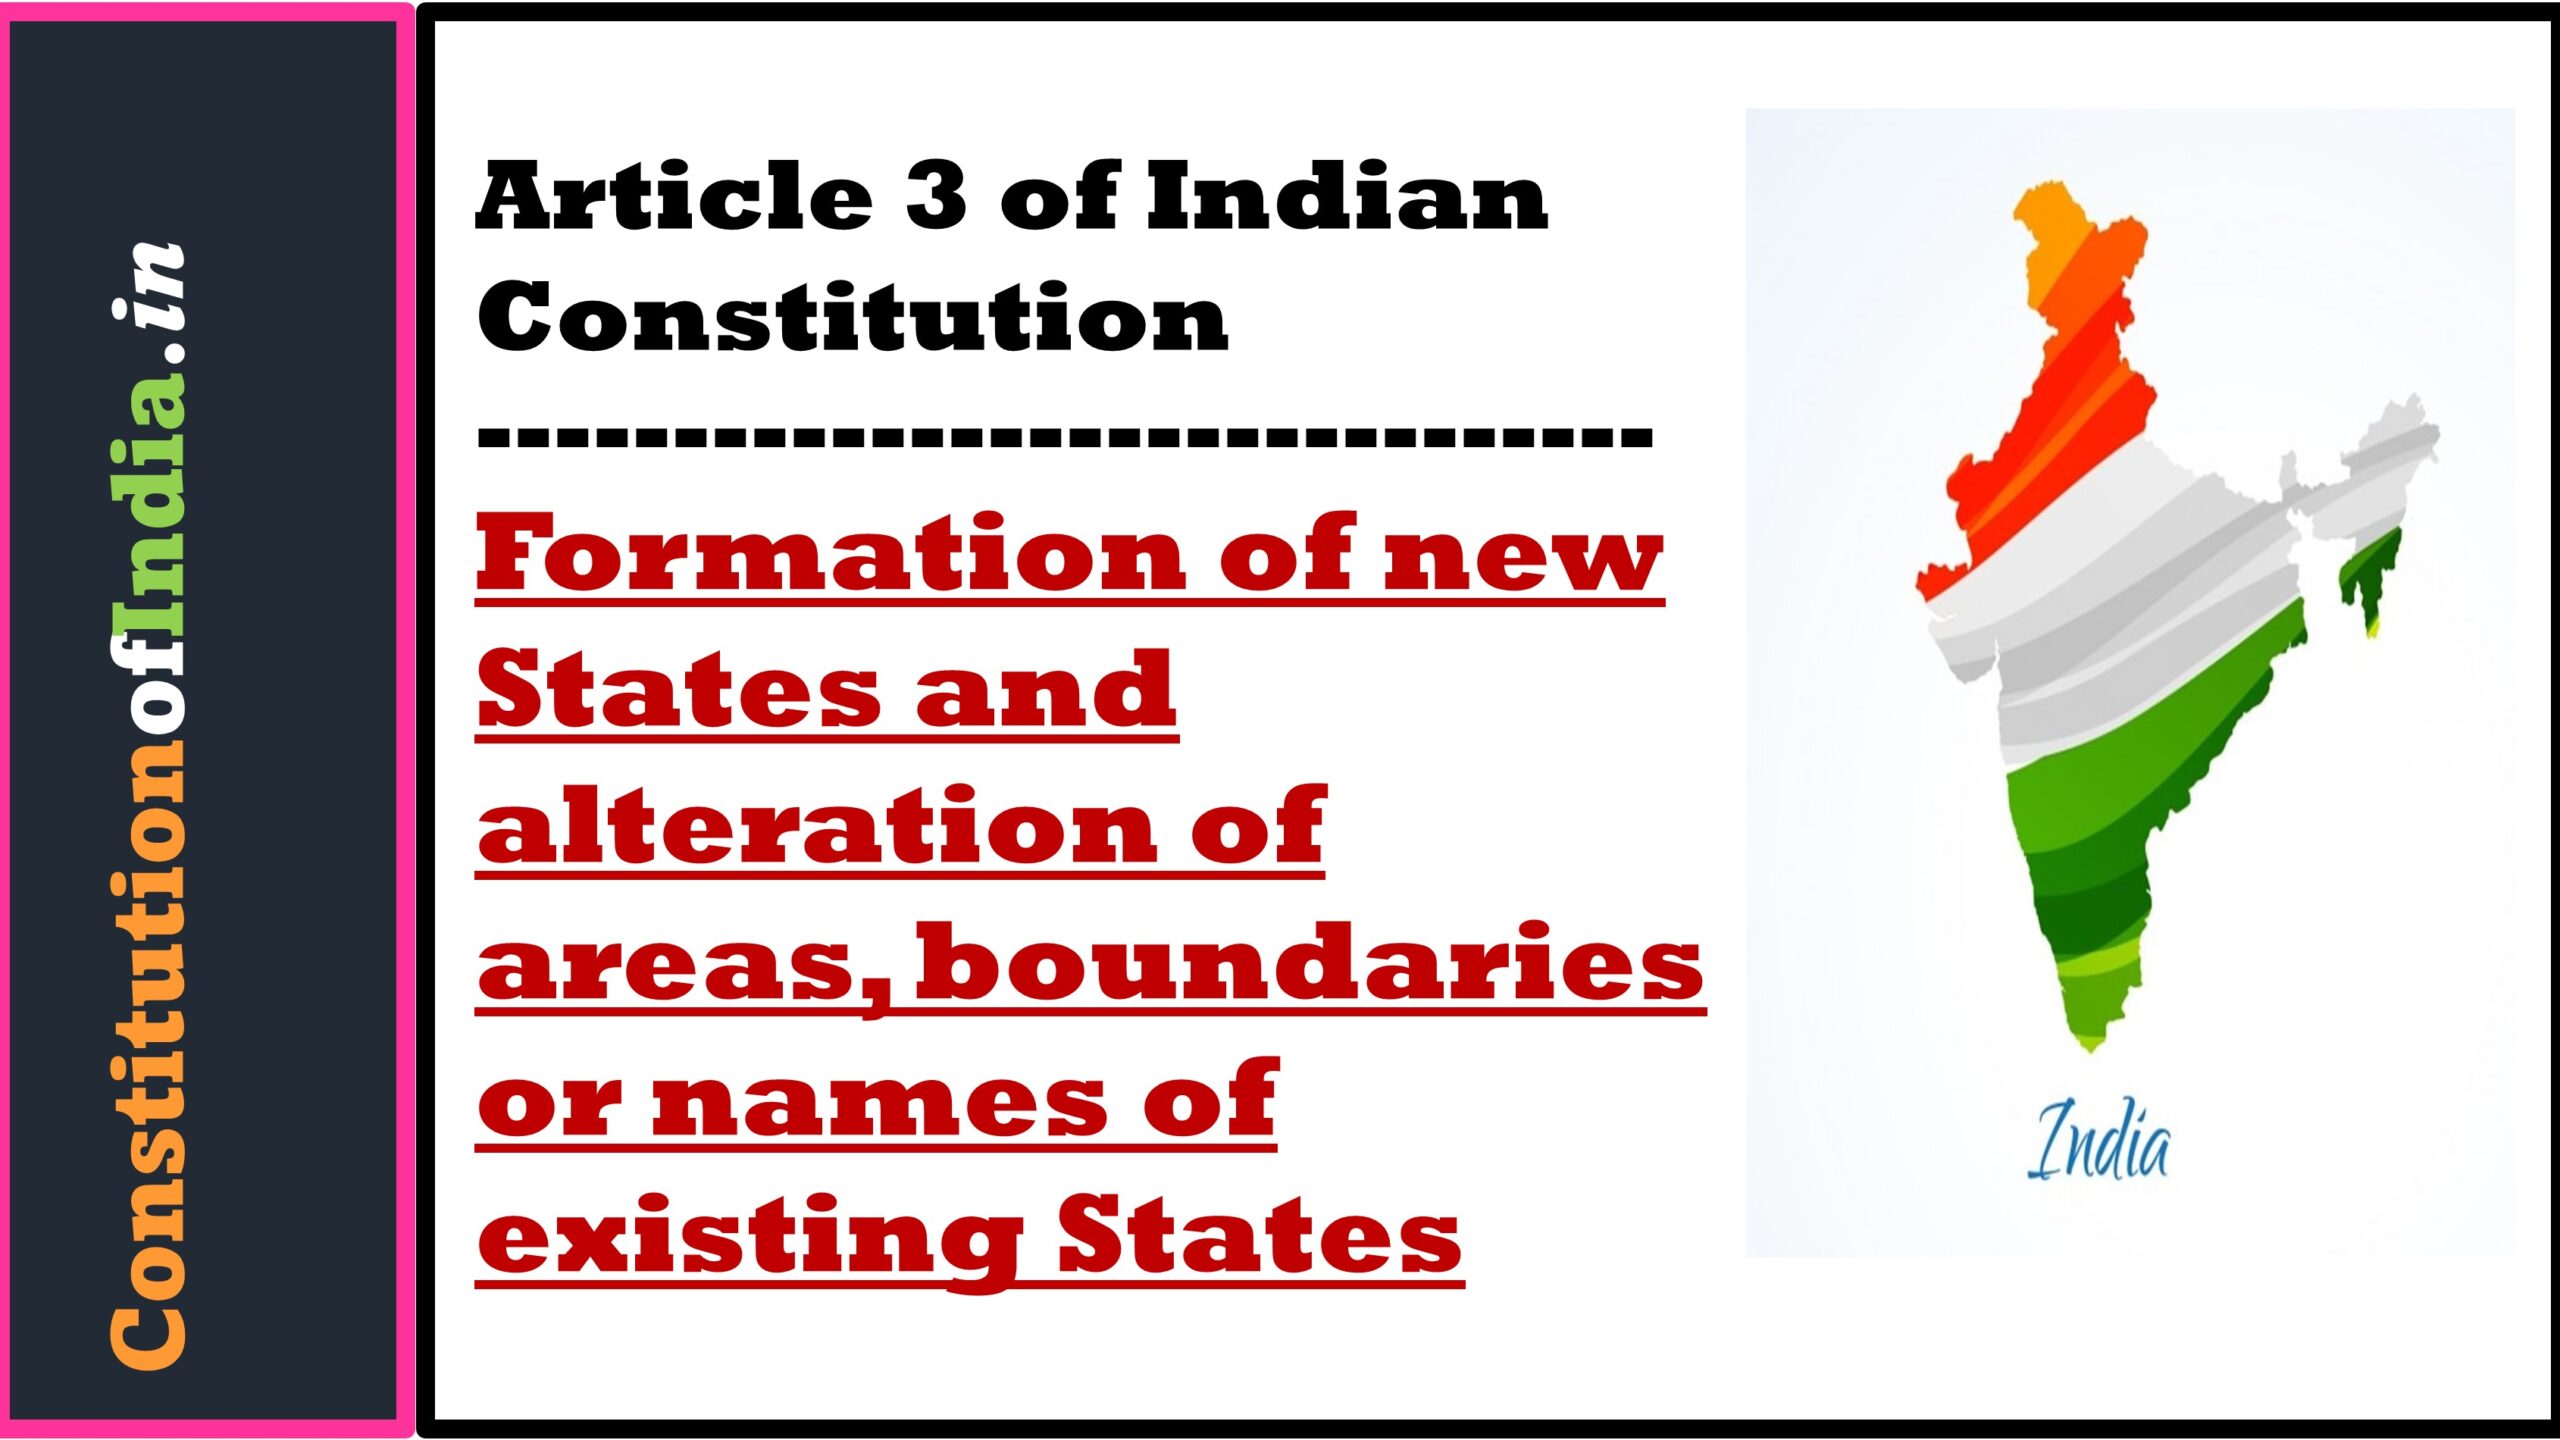 Article 3 of Indian Constitution